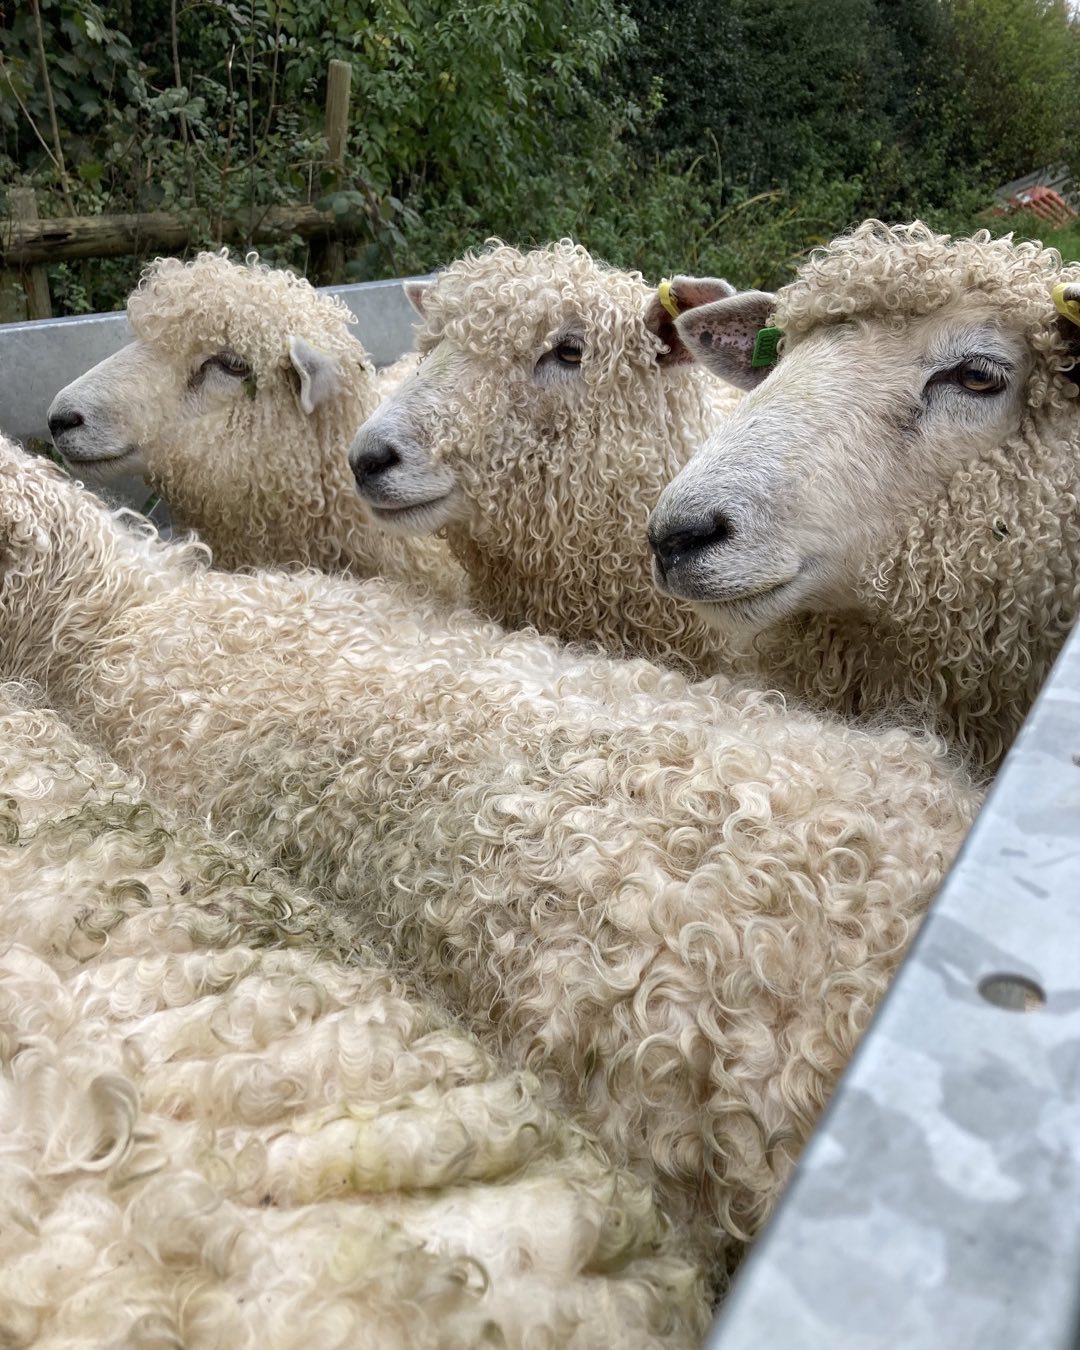 Despite the local floods we managed to move some of our hogget to new pasture at the weekend.These boys will provide more lovely fibre for processing in the Spring. In the meantime they need their fleeces to protect themselves from the winter weather.. wool is naturally warm and waterproof  as it contains lanolin, which is a natural water repellent ️ #naturalfibre #sustainable #heritagesheep